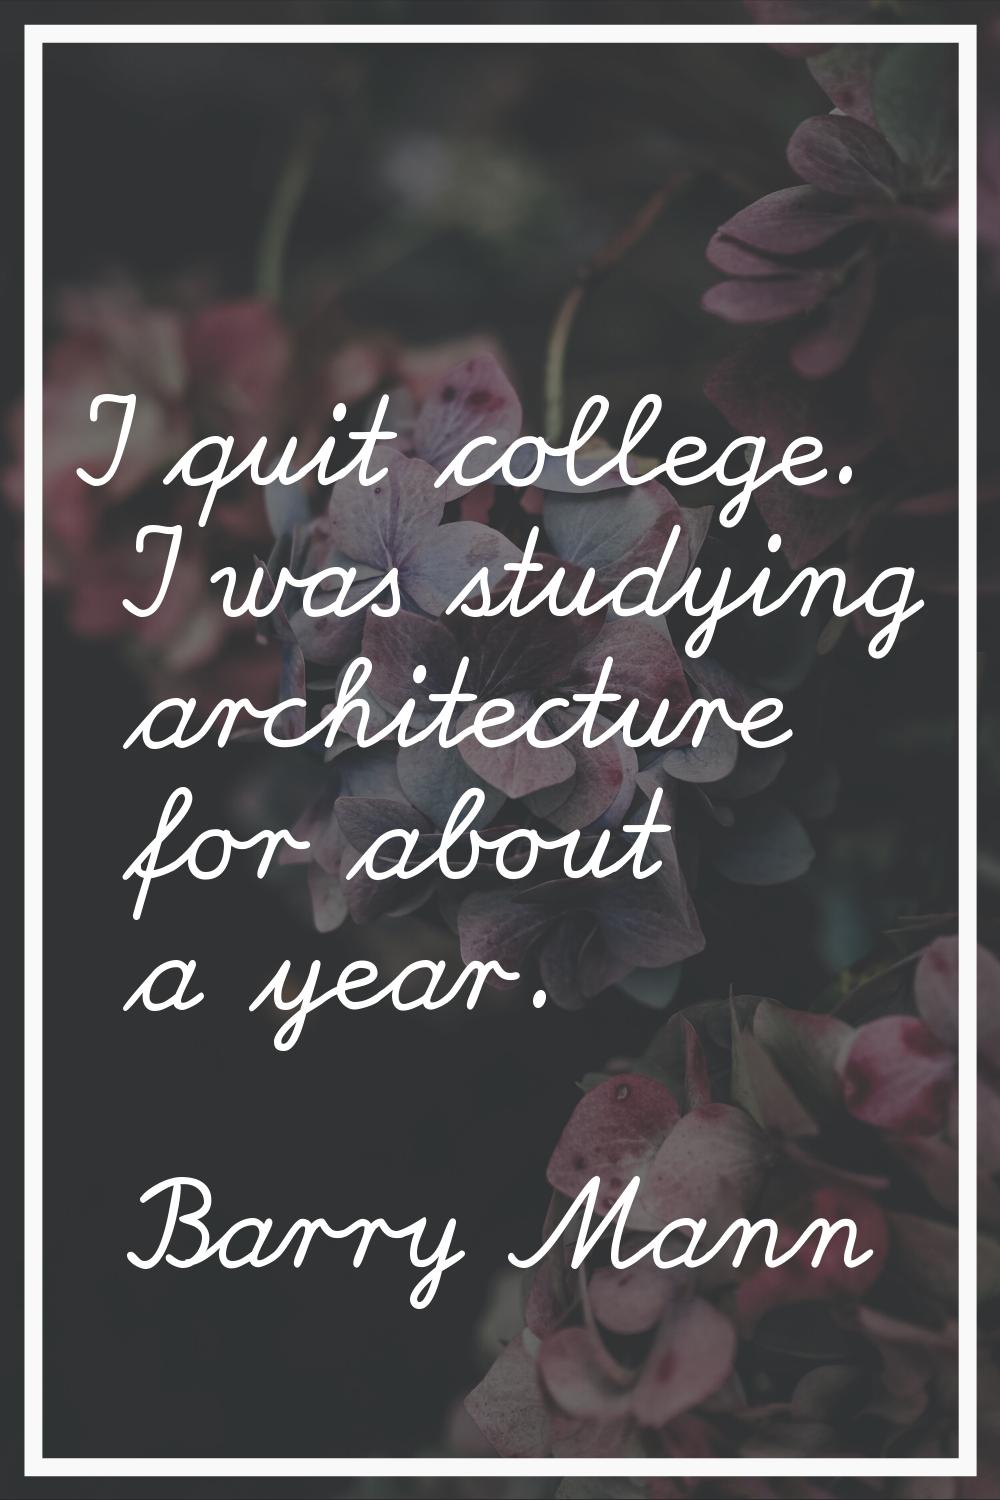 I quit college. I was studying architecture for about a year.